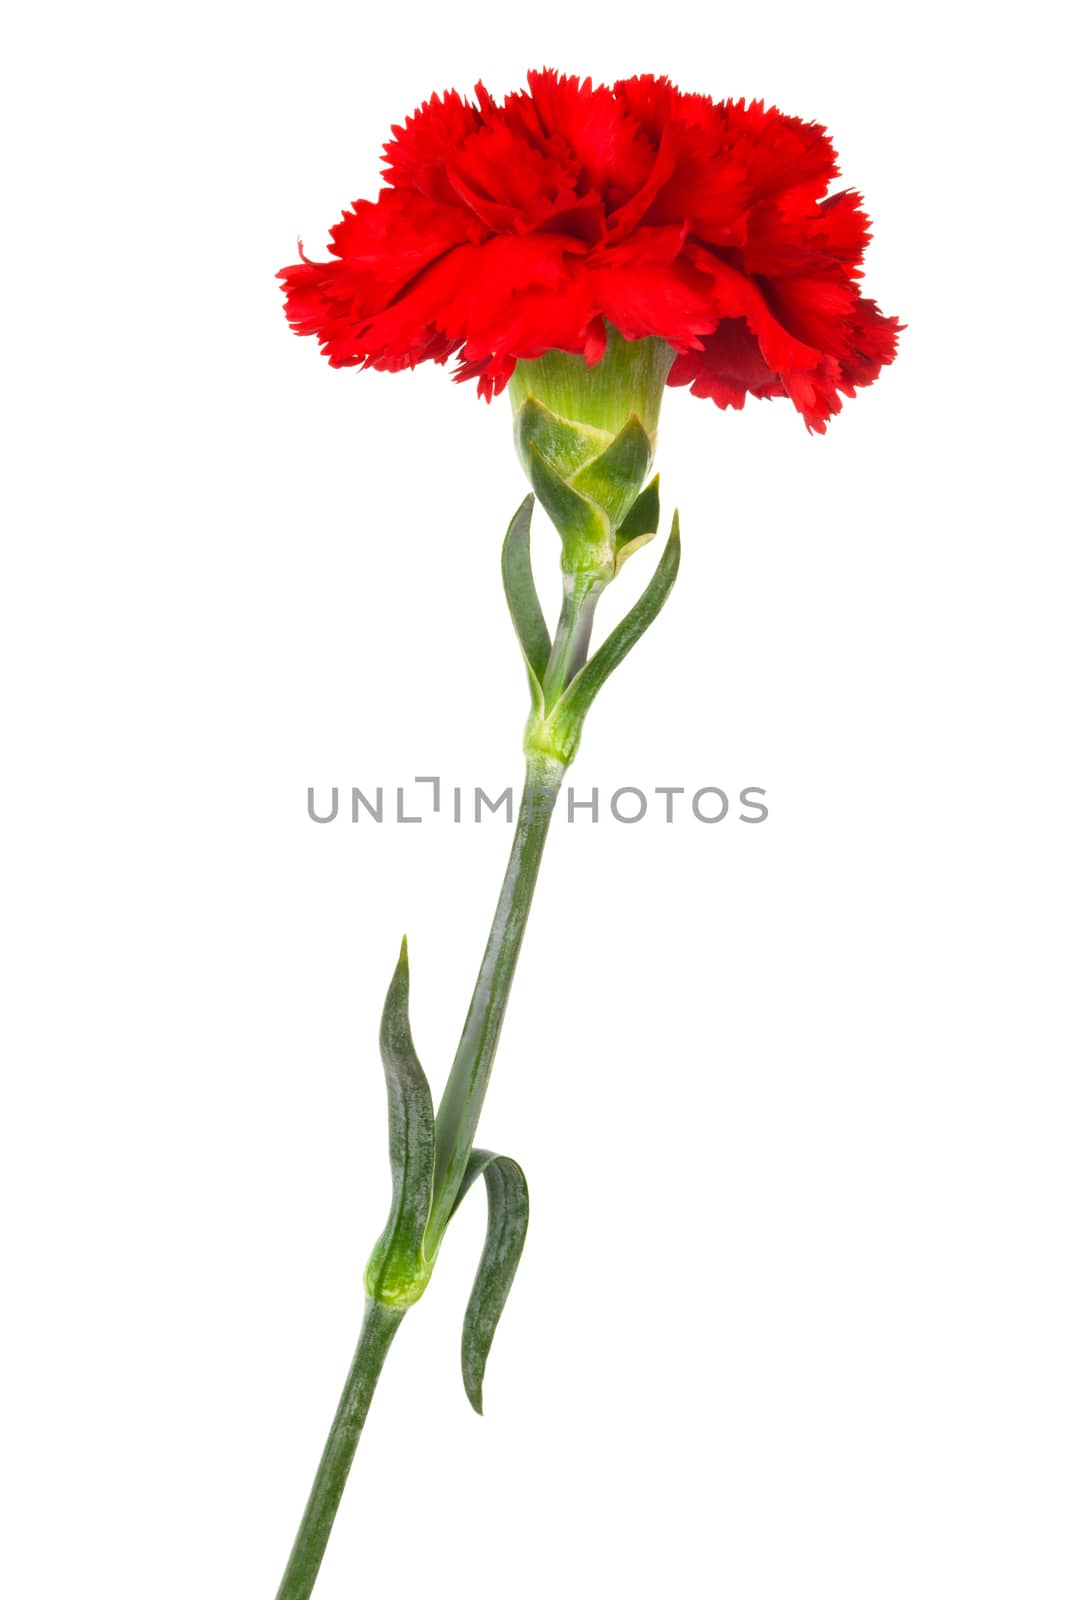 red carnation close-up on a white background